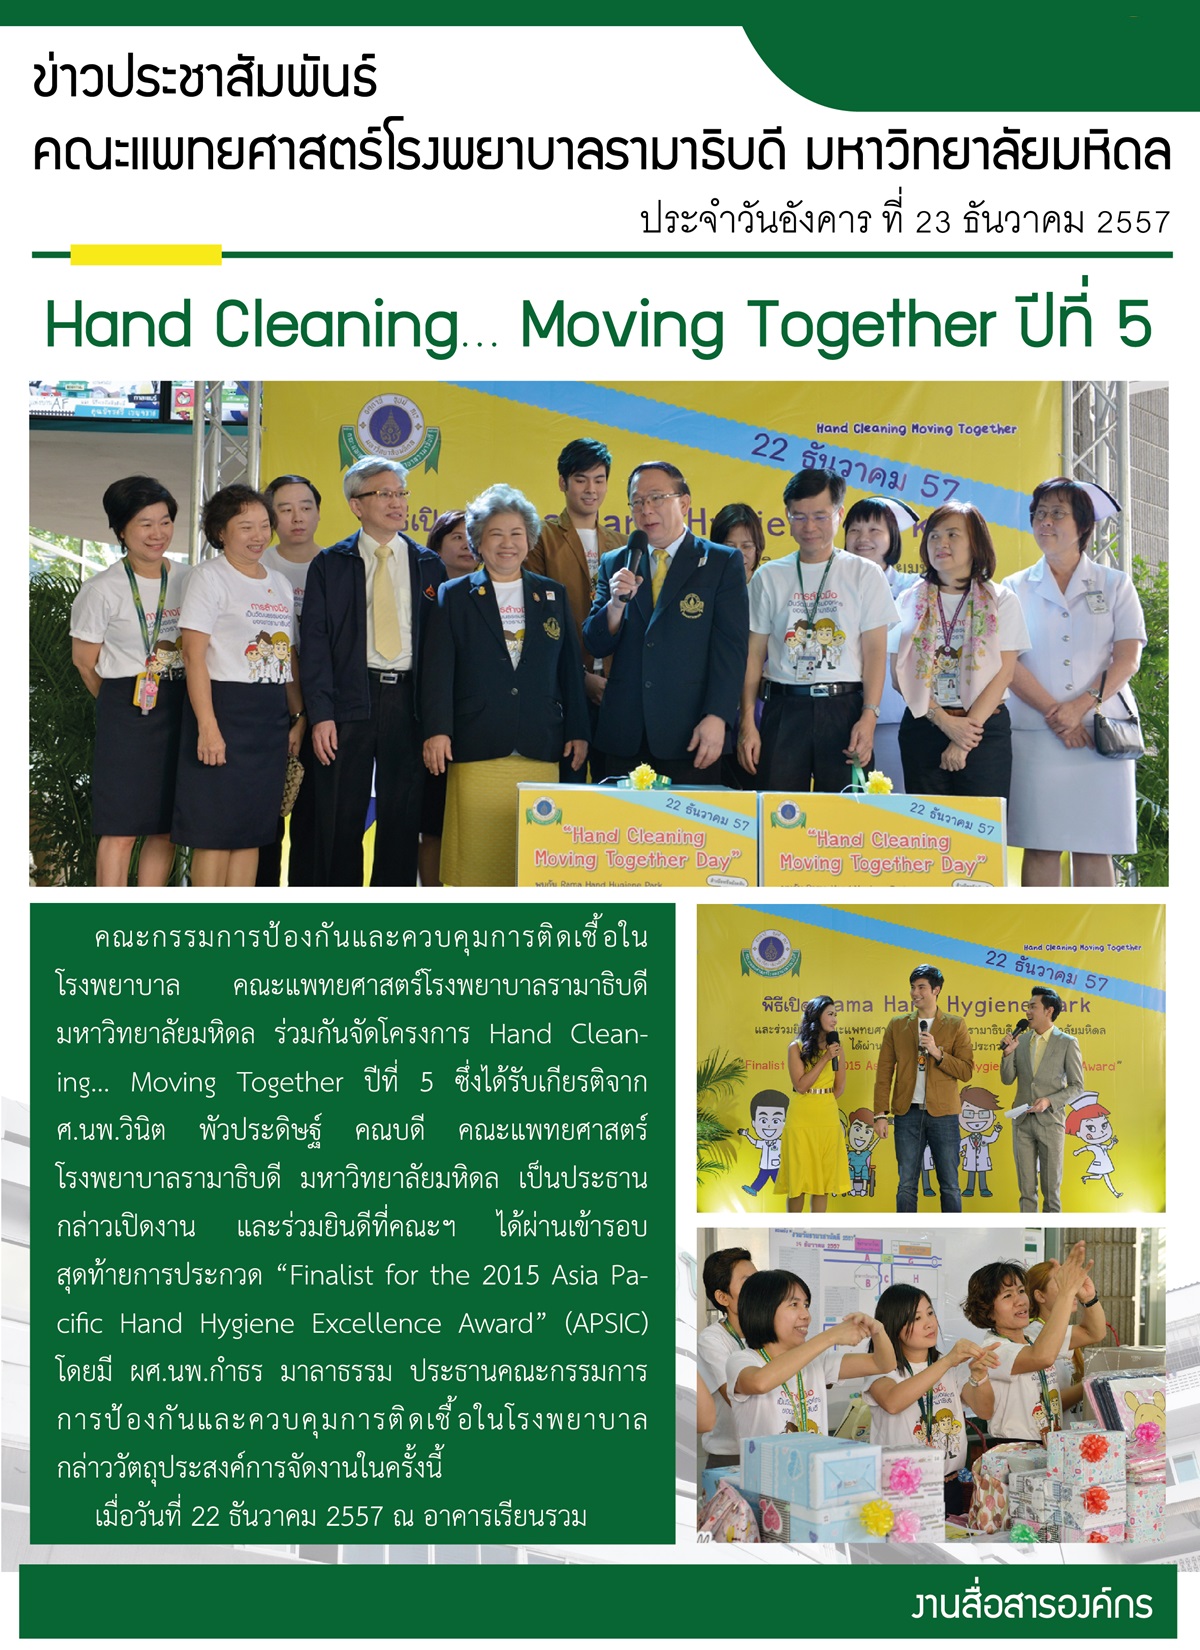 Hand Cleaning… Moving Together ปีที่ 5